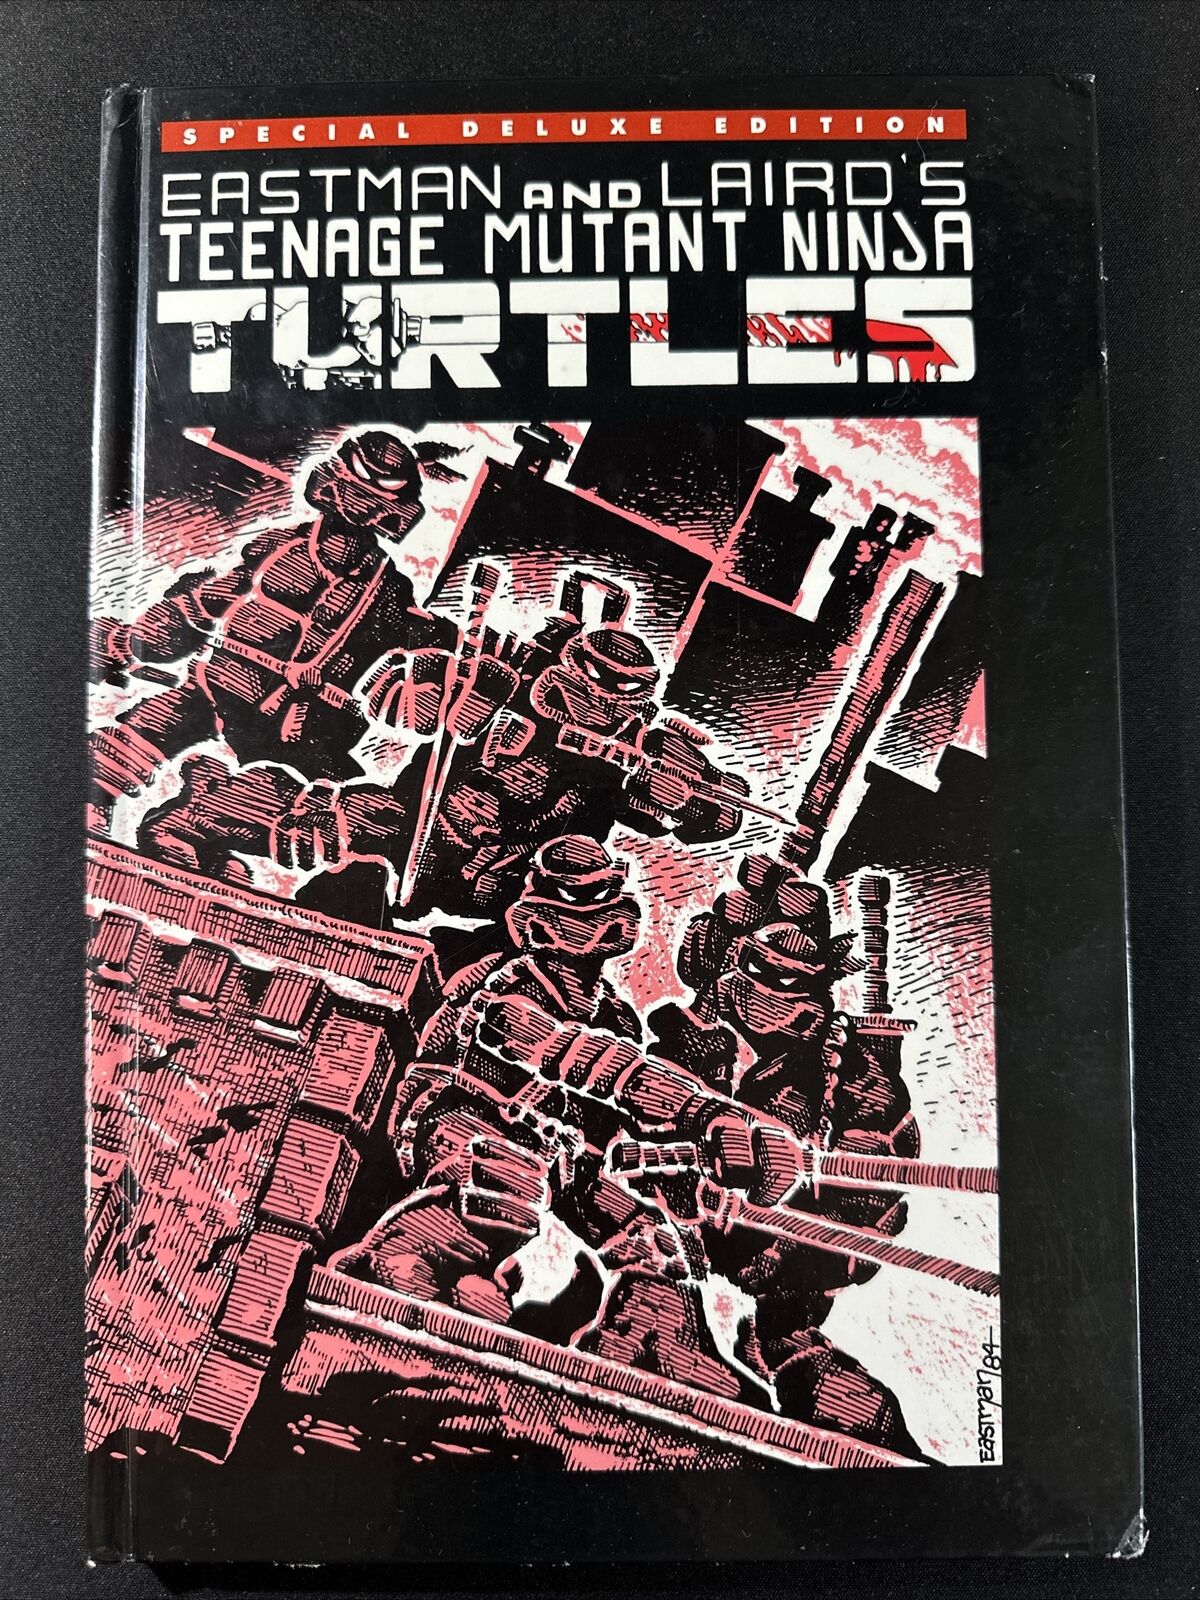 Teenage Mutant Ninja Turtles Special Deluxe Edition Hardcover 2x Signed #260/500